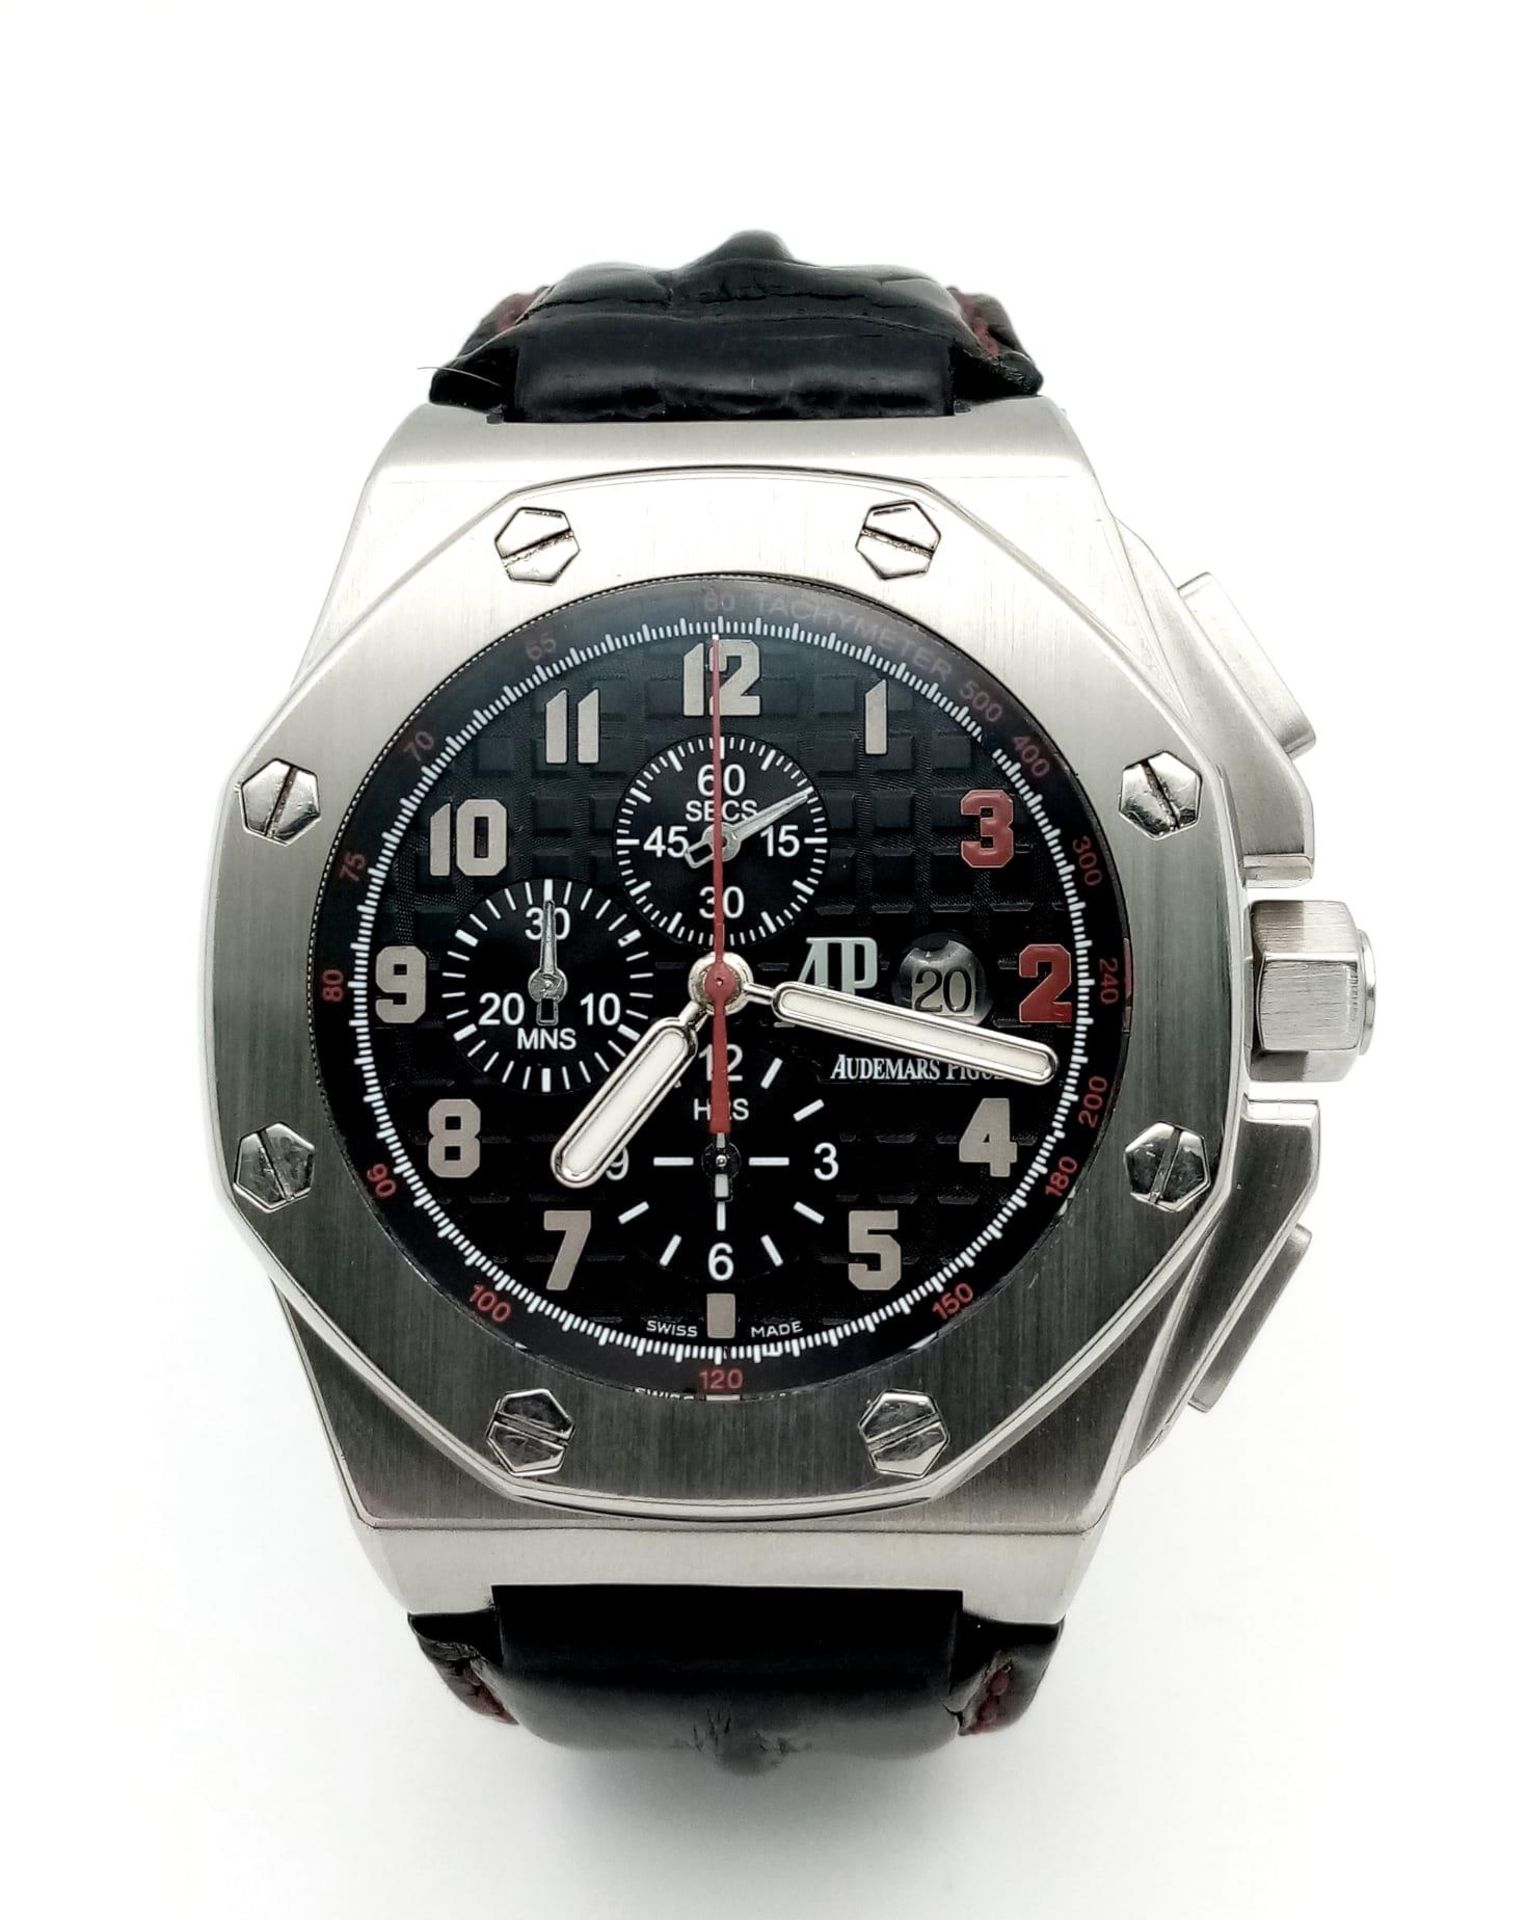 A Rare Limited Edition Audemars Piguet Royal Oak Offshore, Shaquille O'Neal Gents Chronograph Watch. - Image 2 of 6